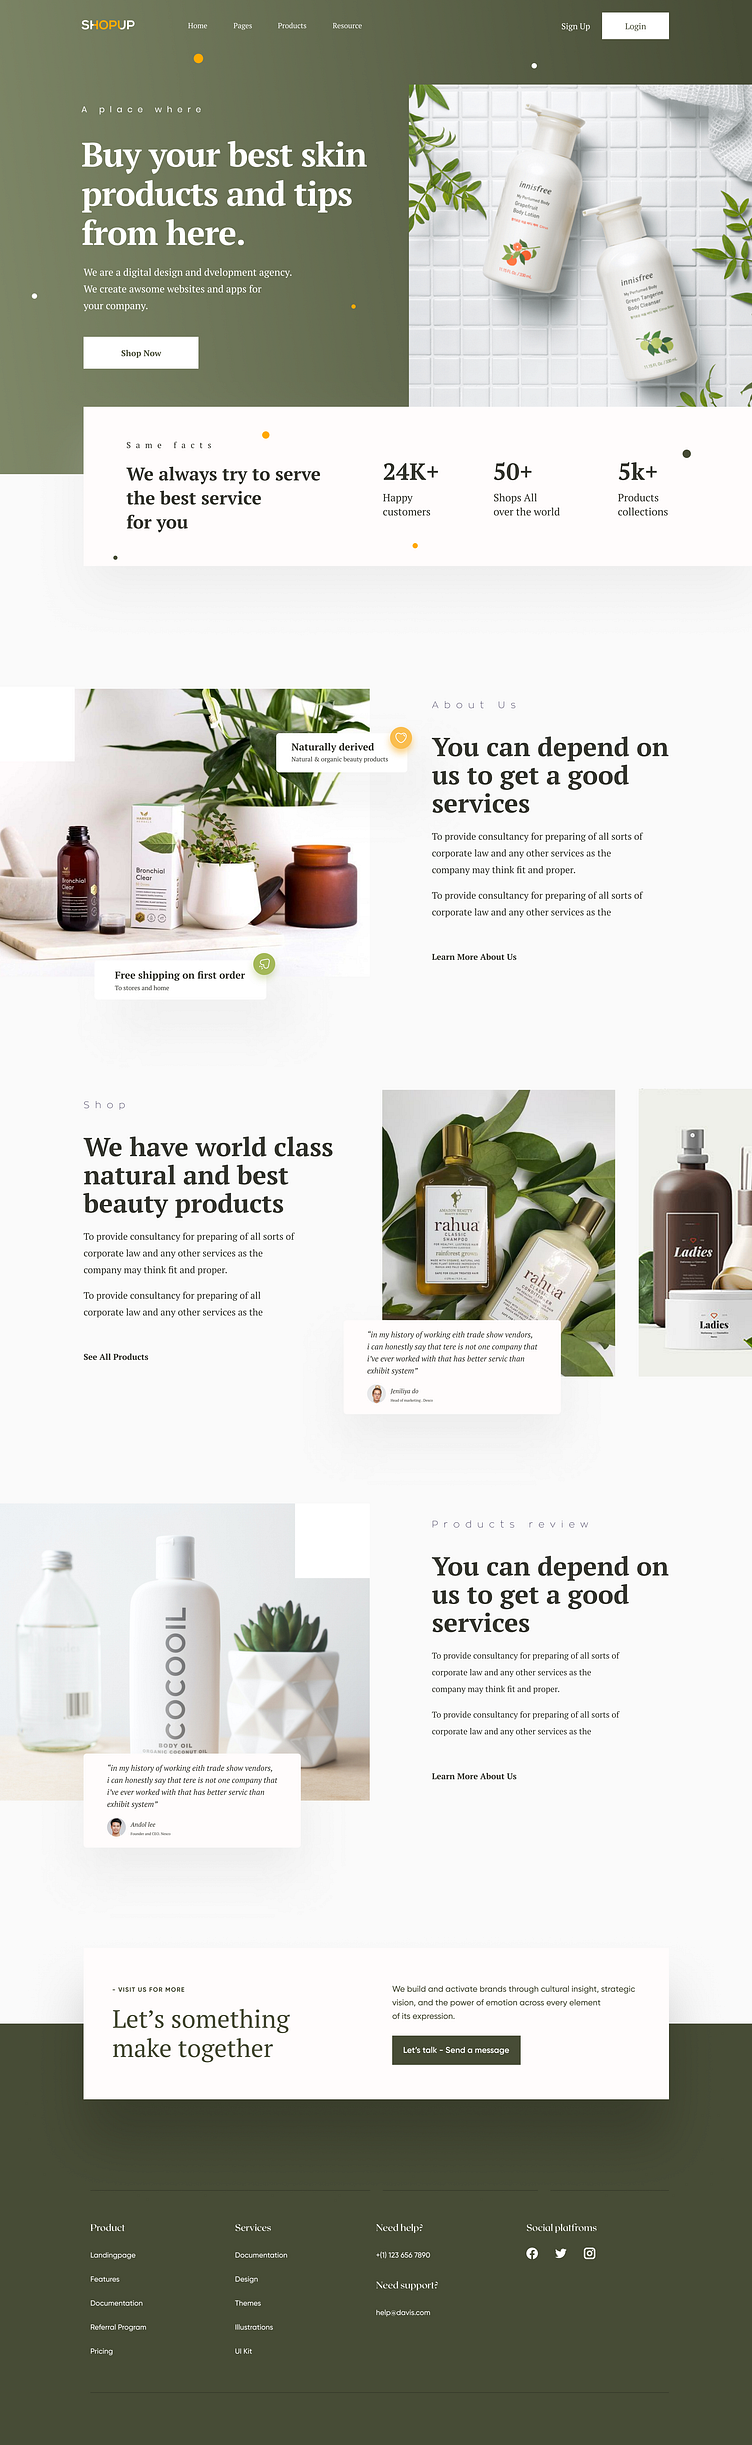 Cosmetic Store Website Design by Suzauddoula Bappy for Zeyox Studio on ...